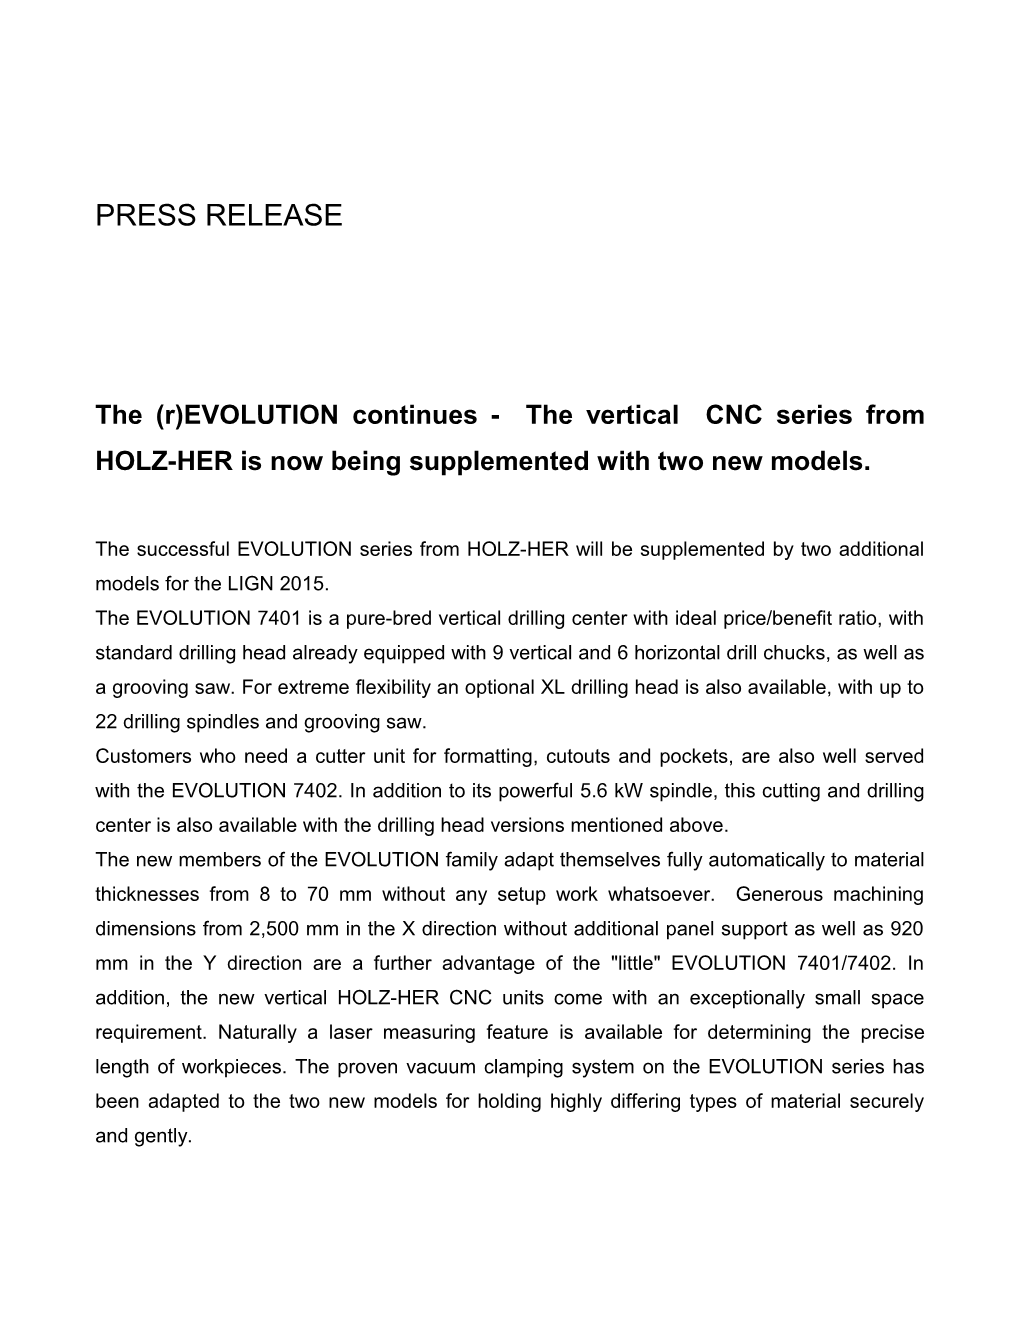 The (R)EVOLUTION Continues - the Vertical CNC Series from HOLZ-HER Is Now Being Supplemented